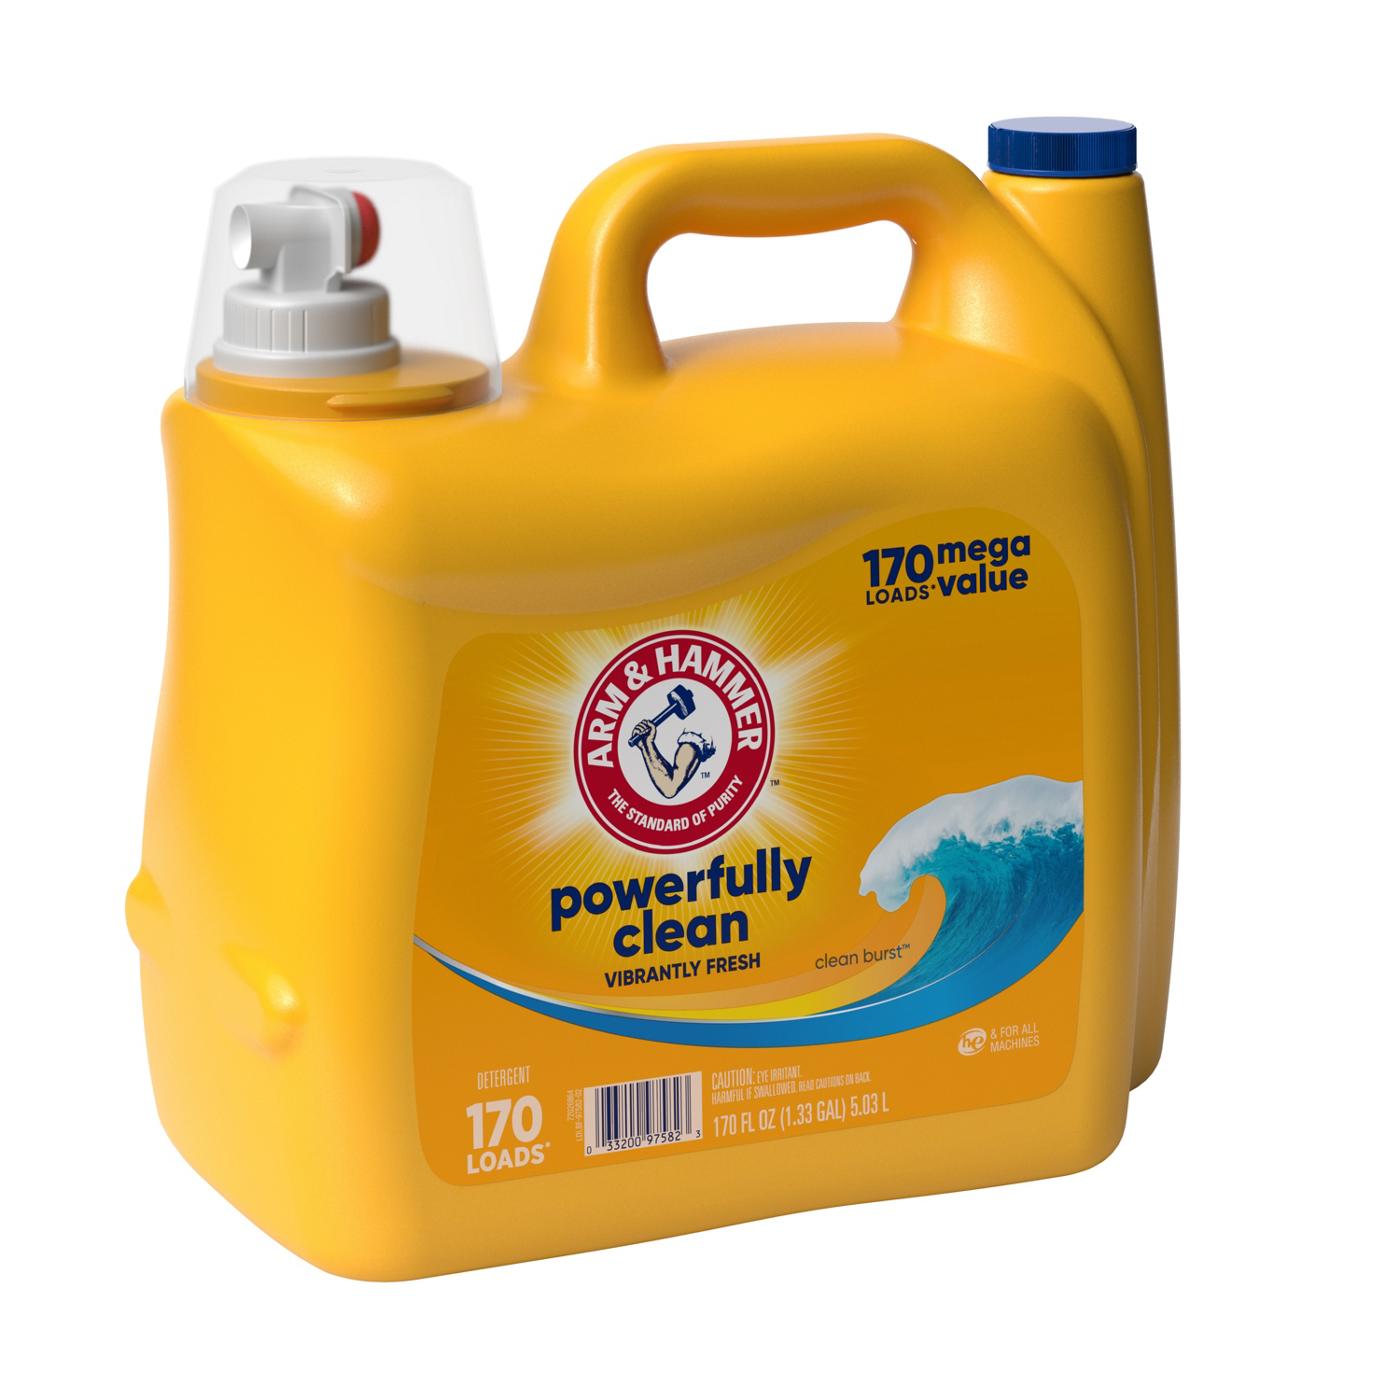 Arm & Hammer Powerfully Clean HE Liquid Laundry Detergent, 170 Loads - Clean Burst; image 2 of 2